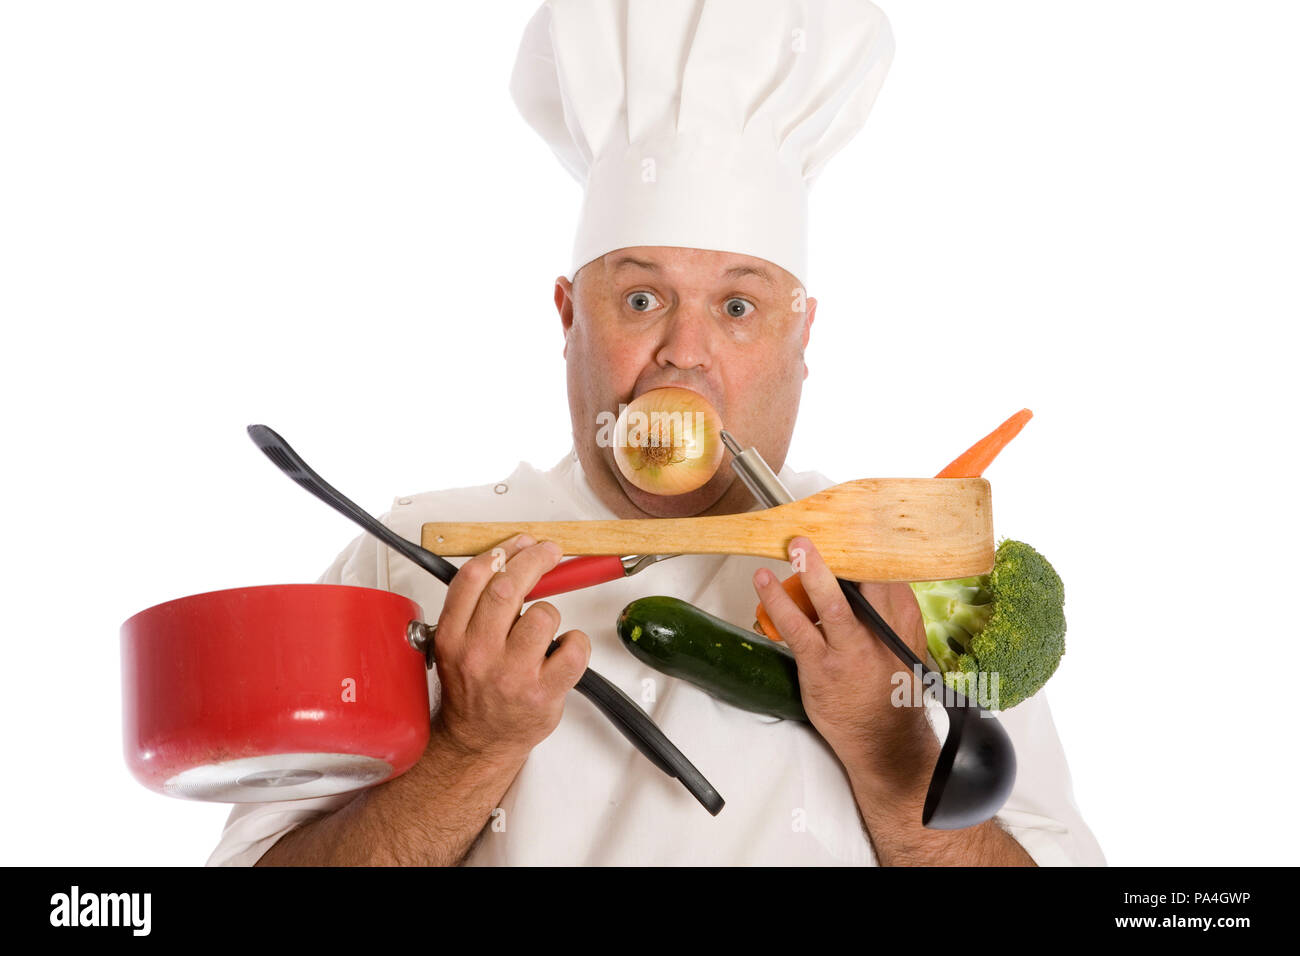 A busy chef struggling to keep up with the work load. Stock Photo